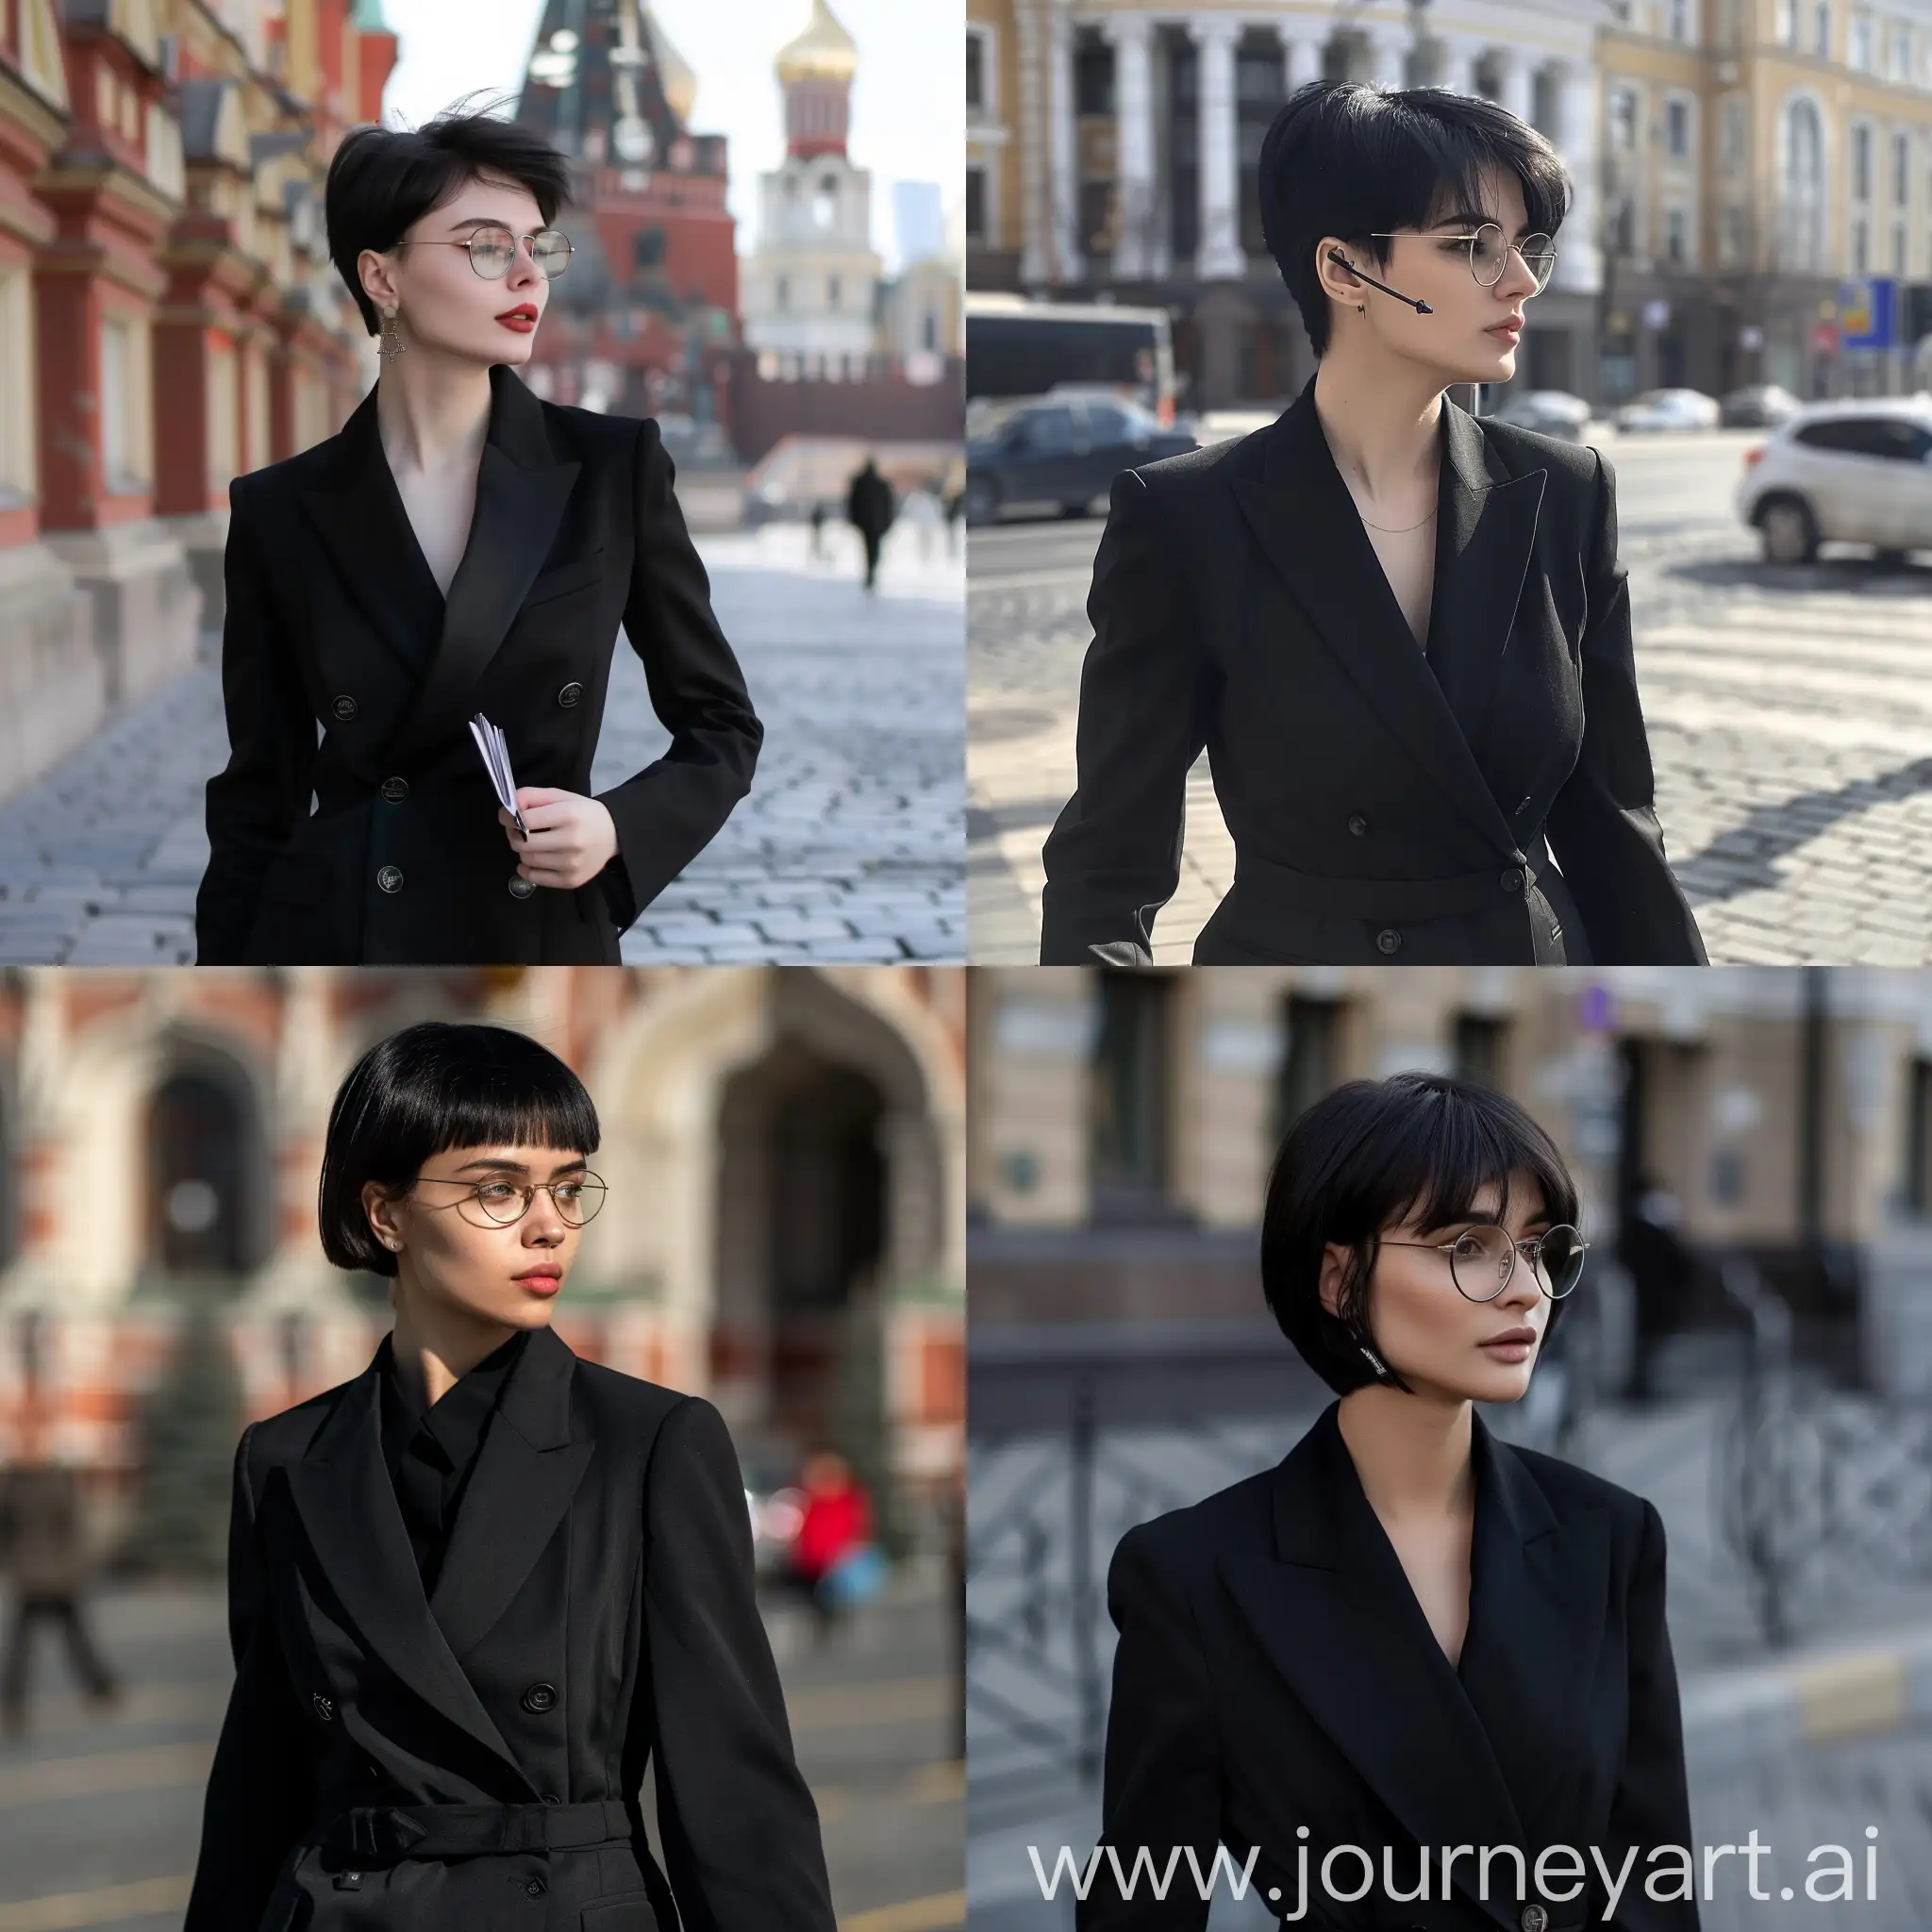 a beautiful russian young girl, reporter, short black hair, reading glasses, wearing a black suit, walking in the Moscow street.